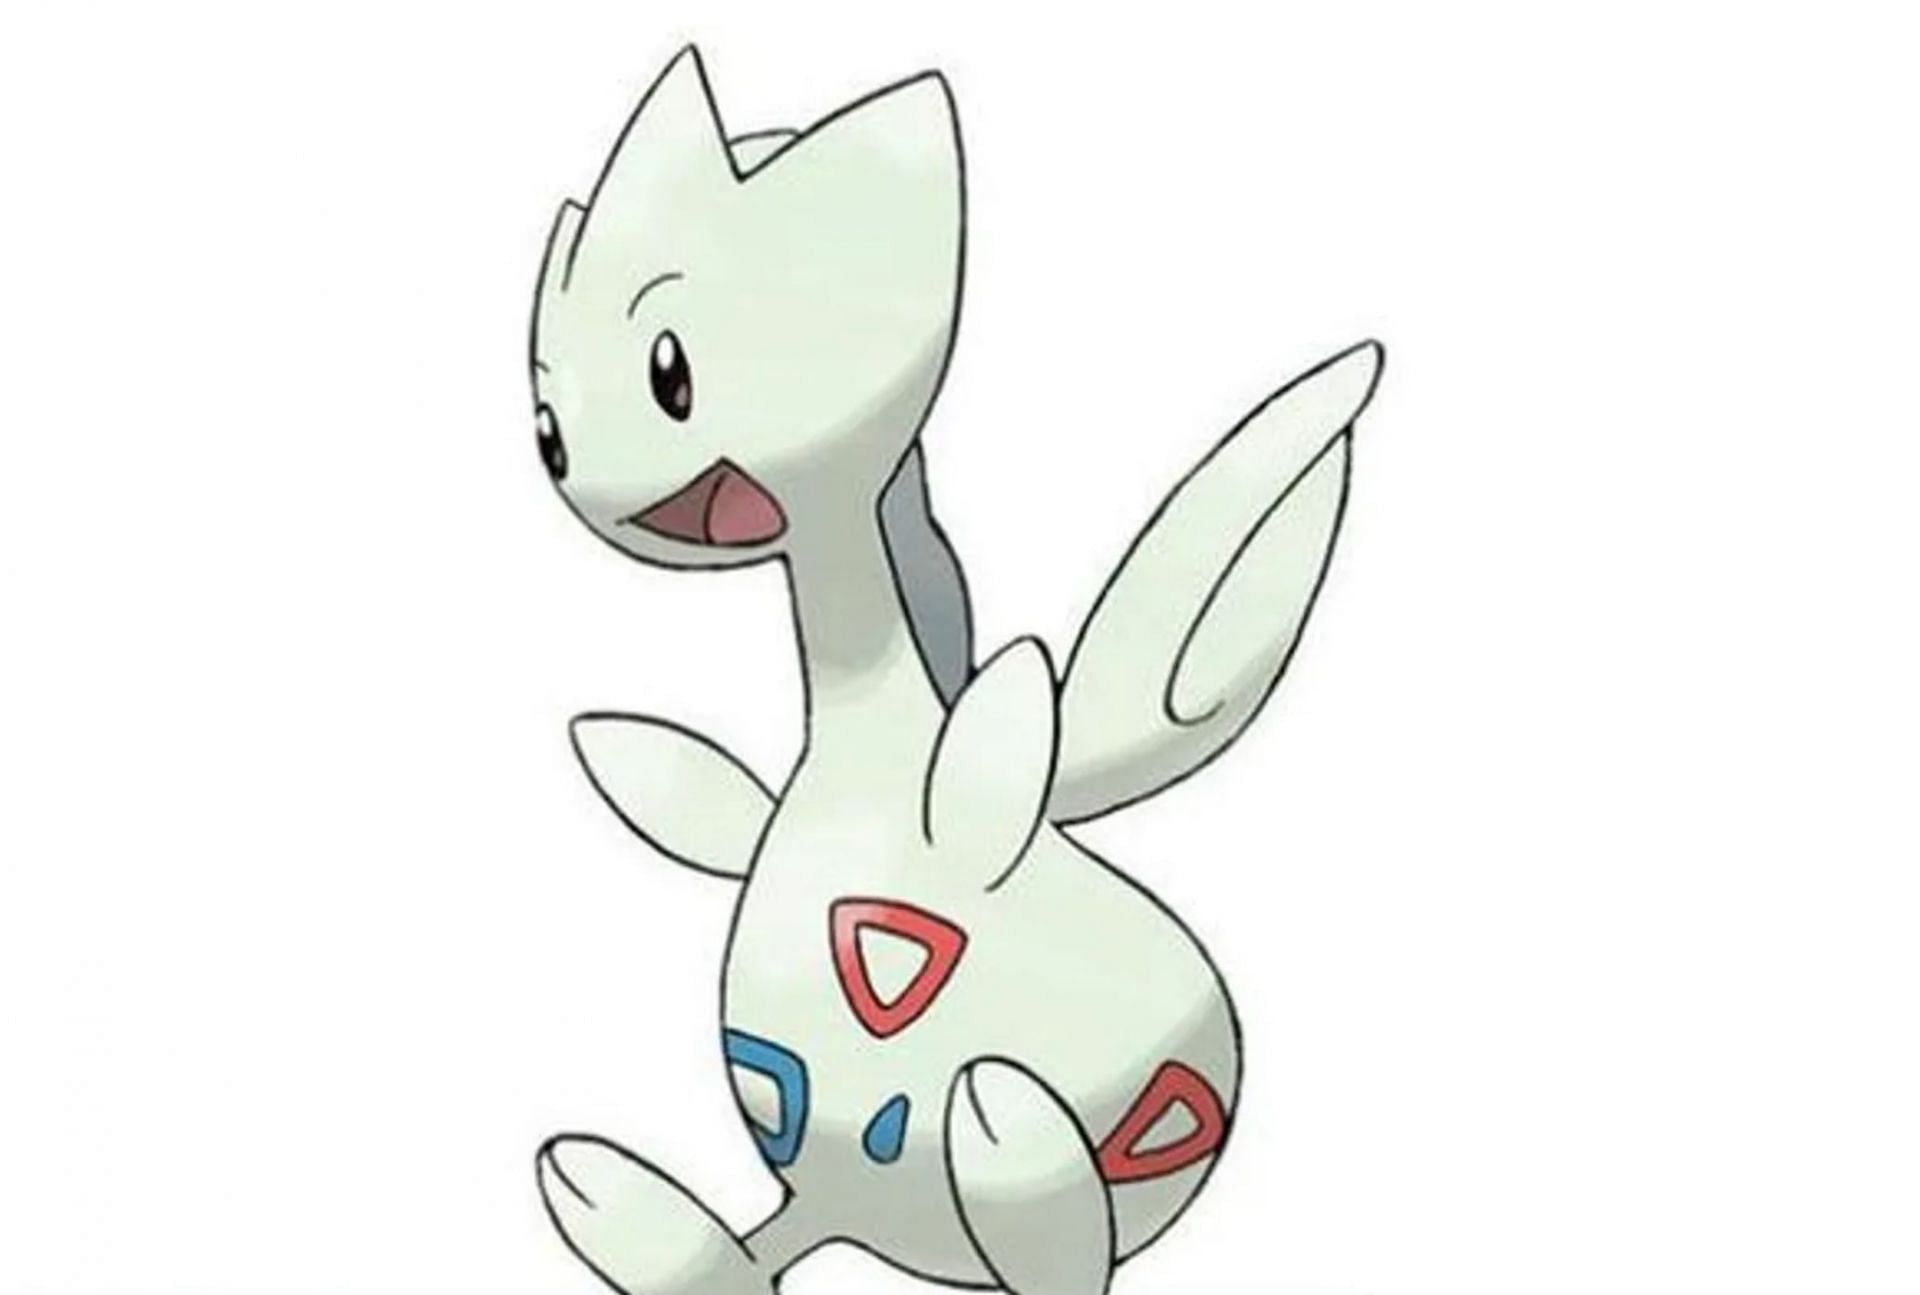 Togetic has some decent attacks in its own right (Image via The Pokemon Company)